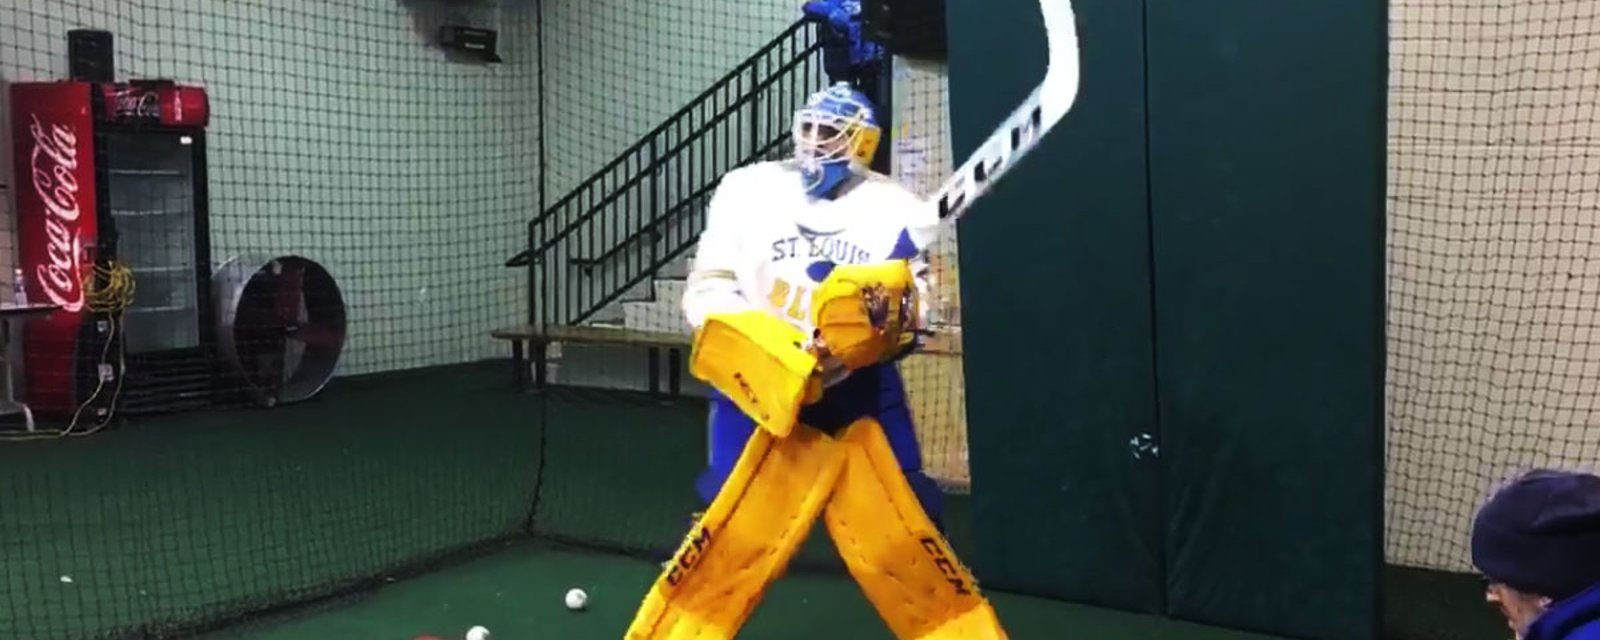 Must See: Carter Hutton is ready for spring training!